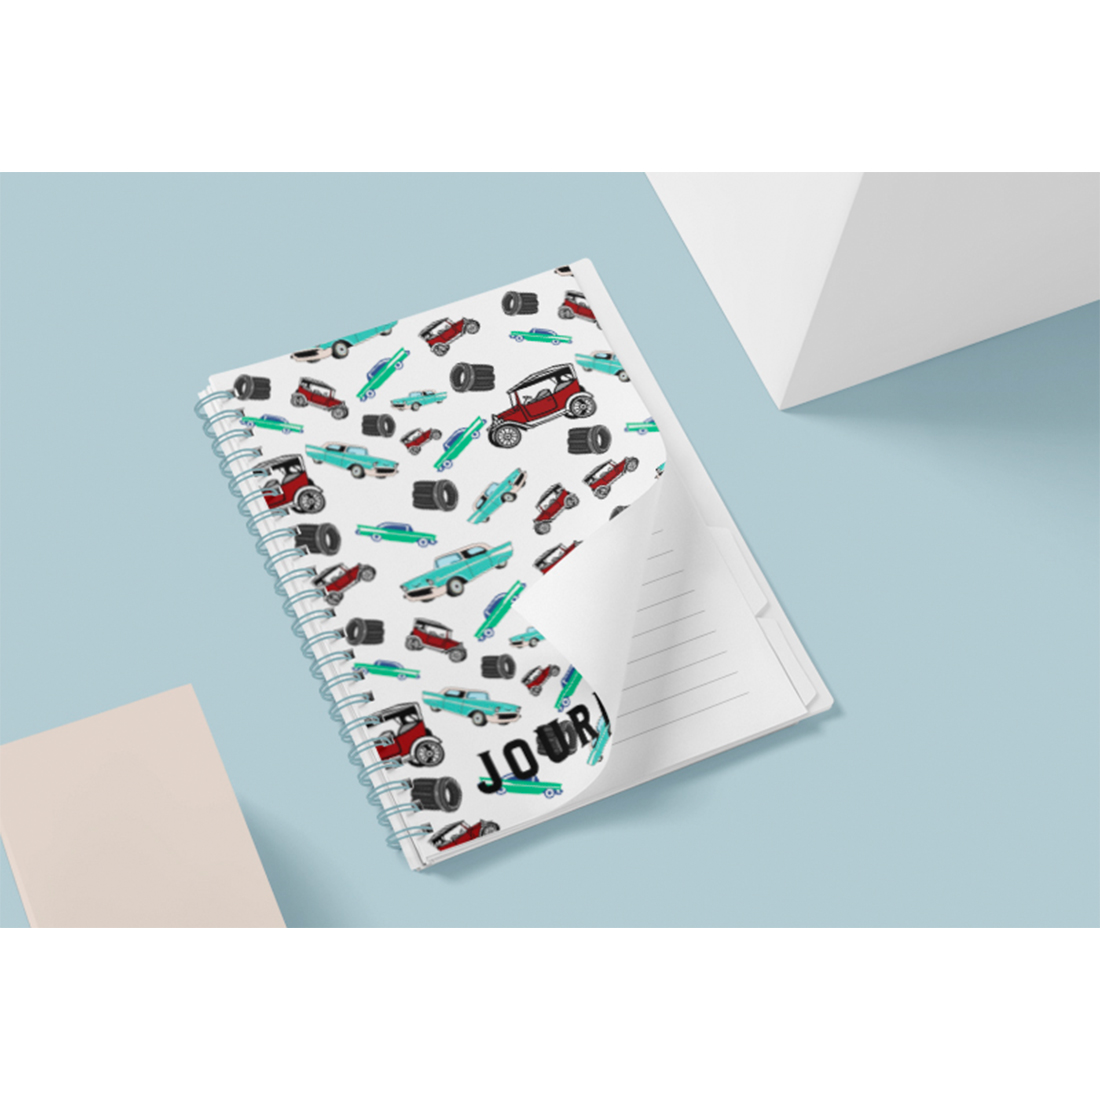 Light notebook with cars on a cover.